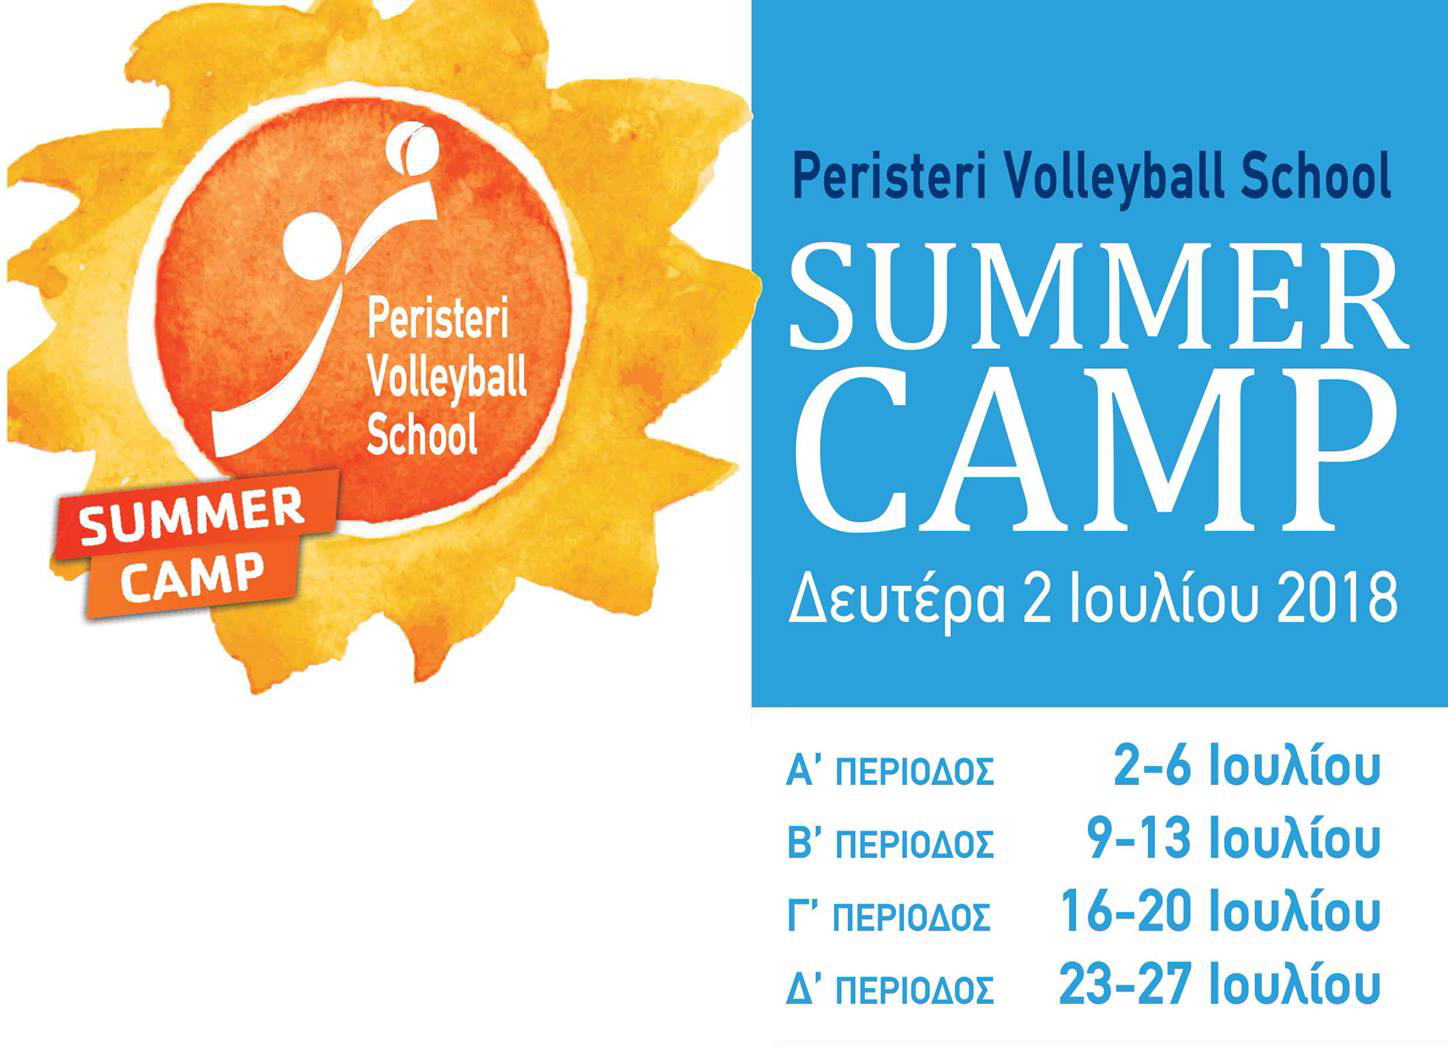 Volleyball Camp